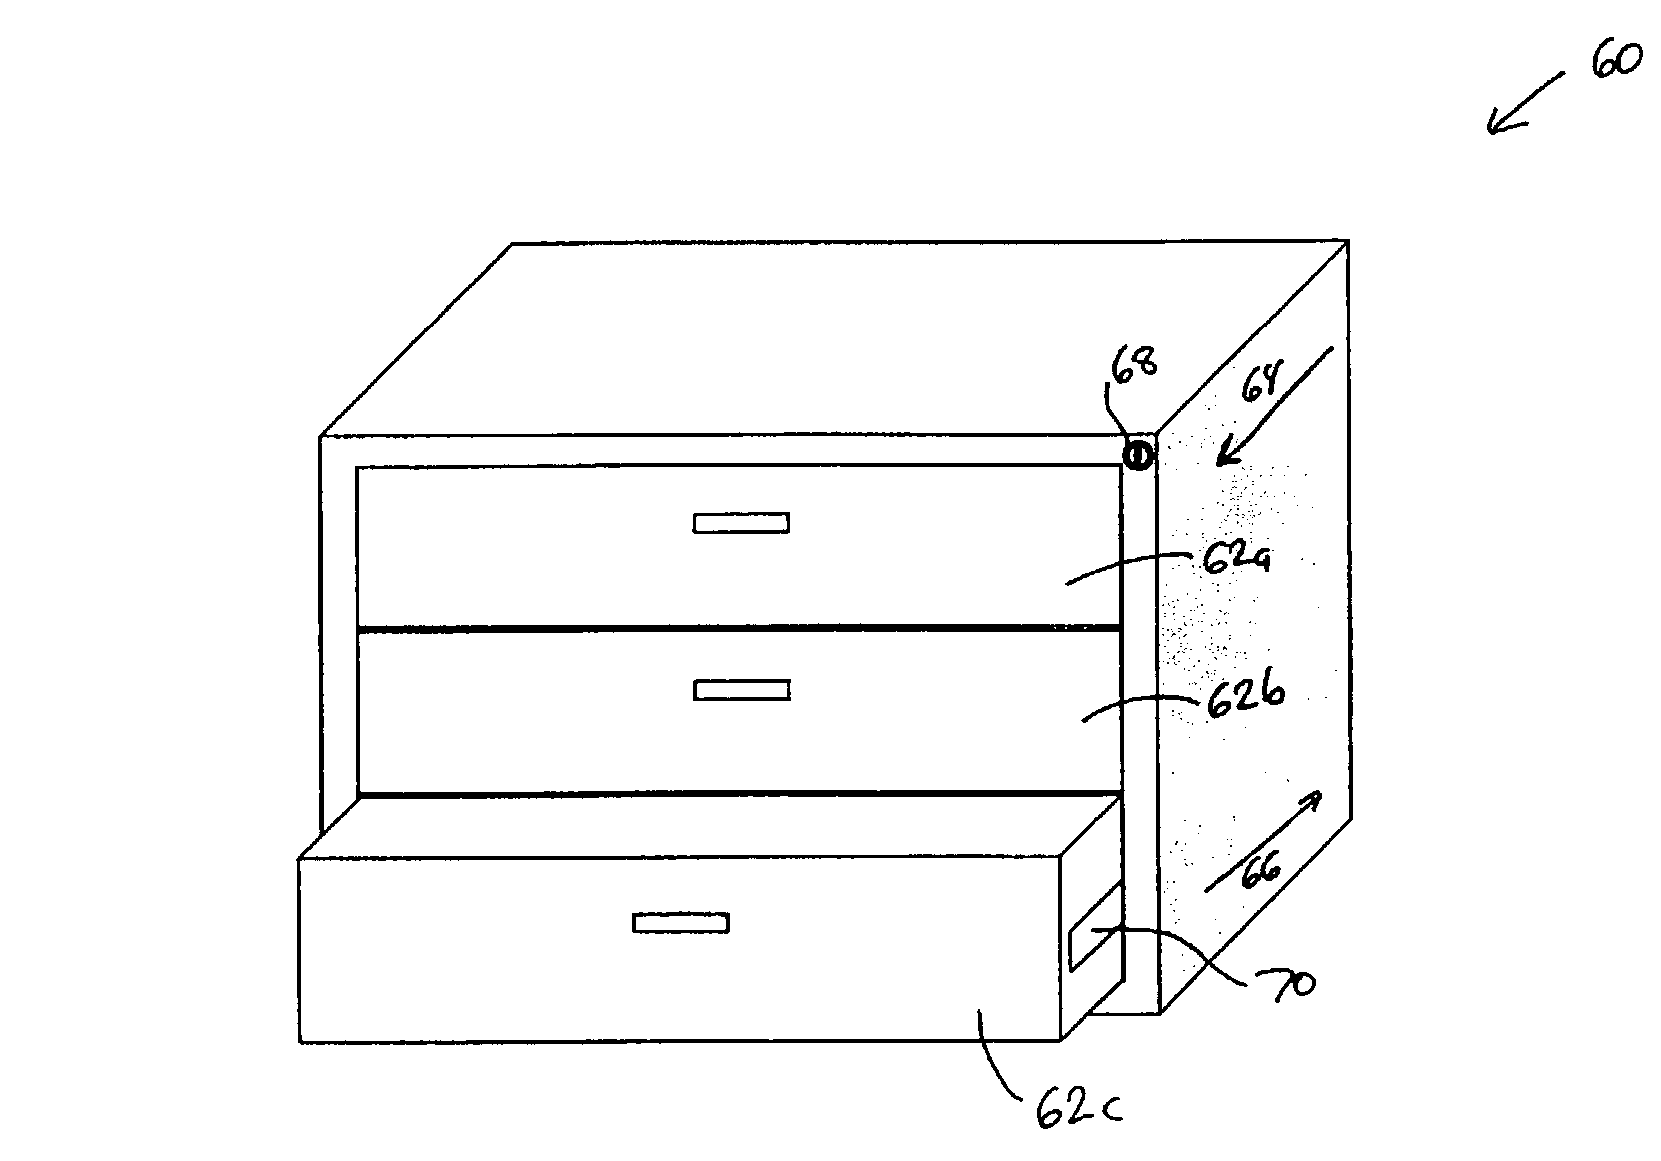 Interlock mechanism for lateral file cabinets